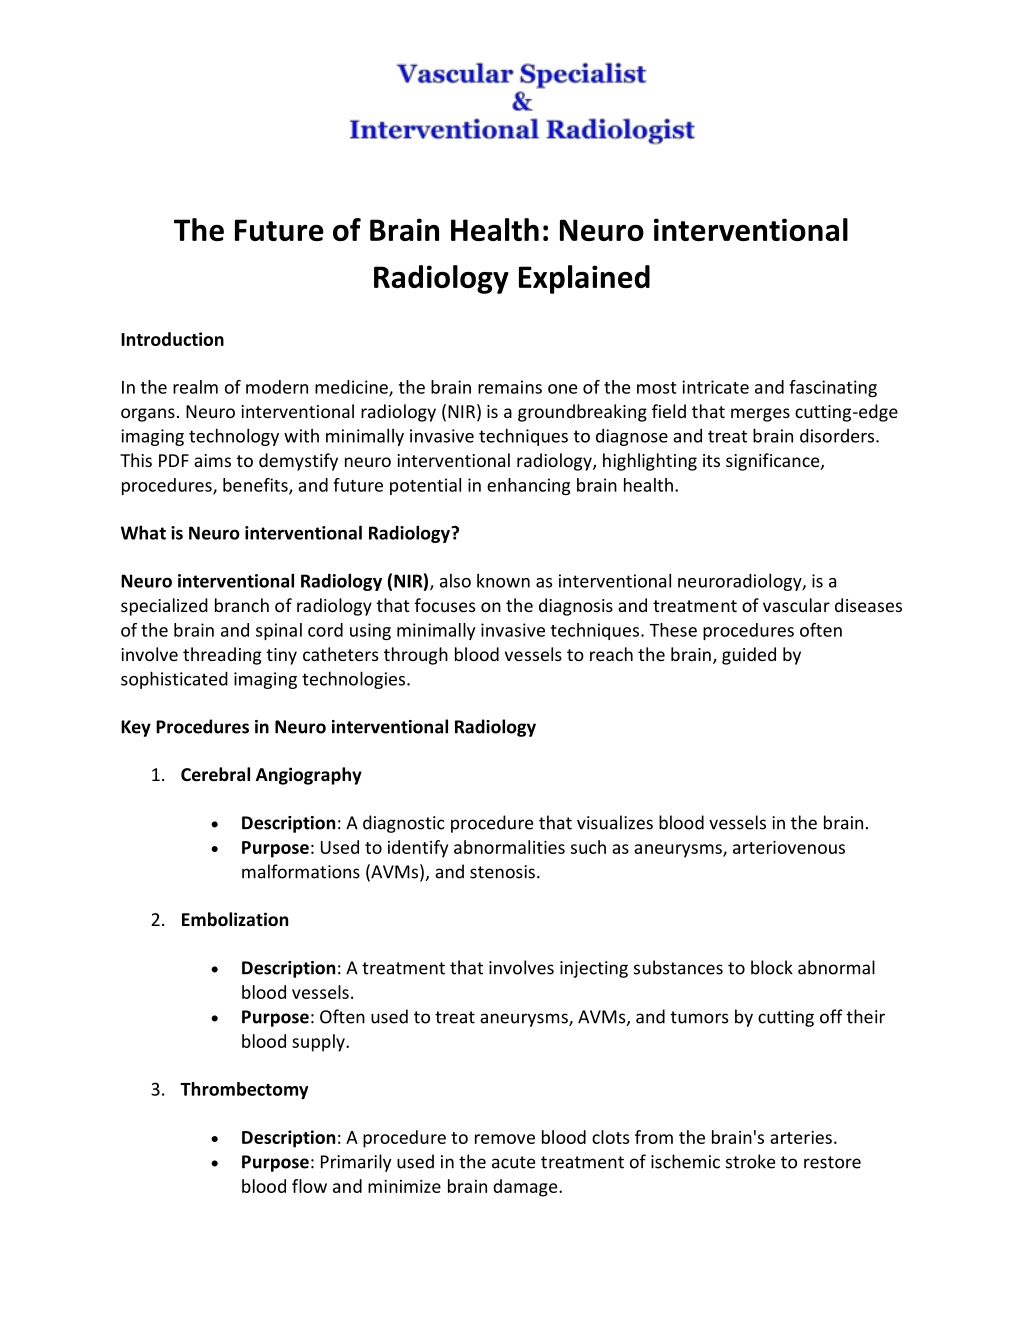 PPT - The Future of Brain Health Neuro interventional Radiology ...